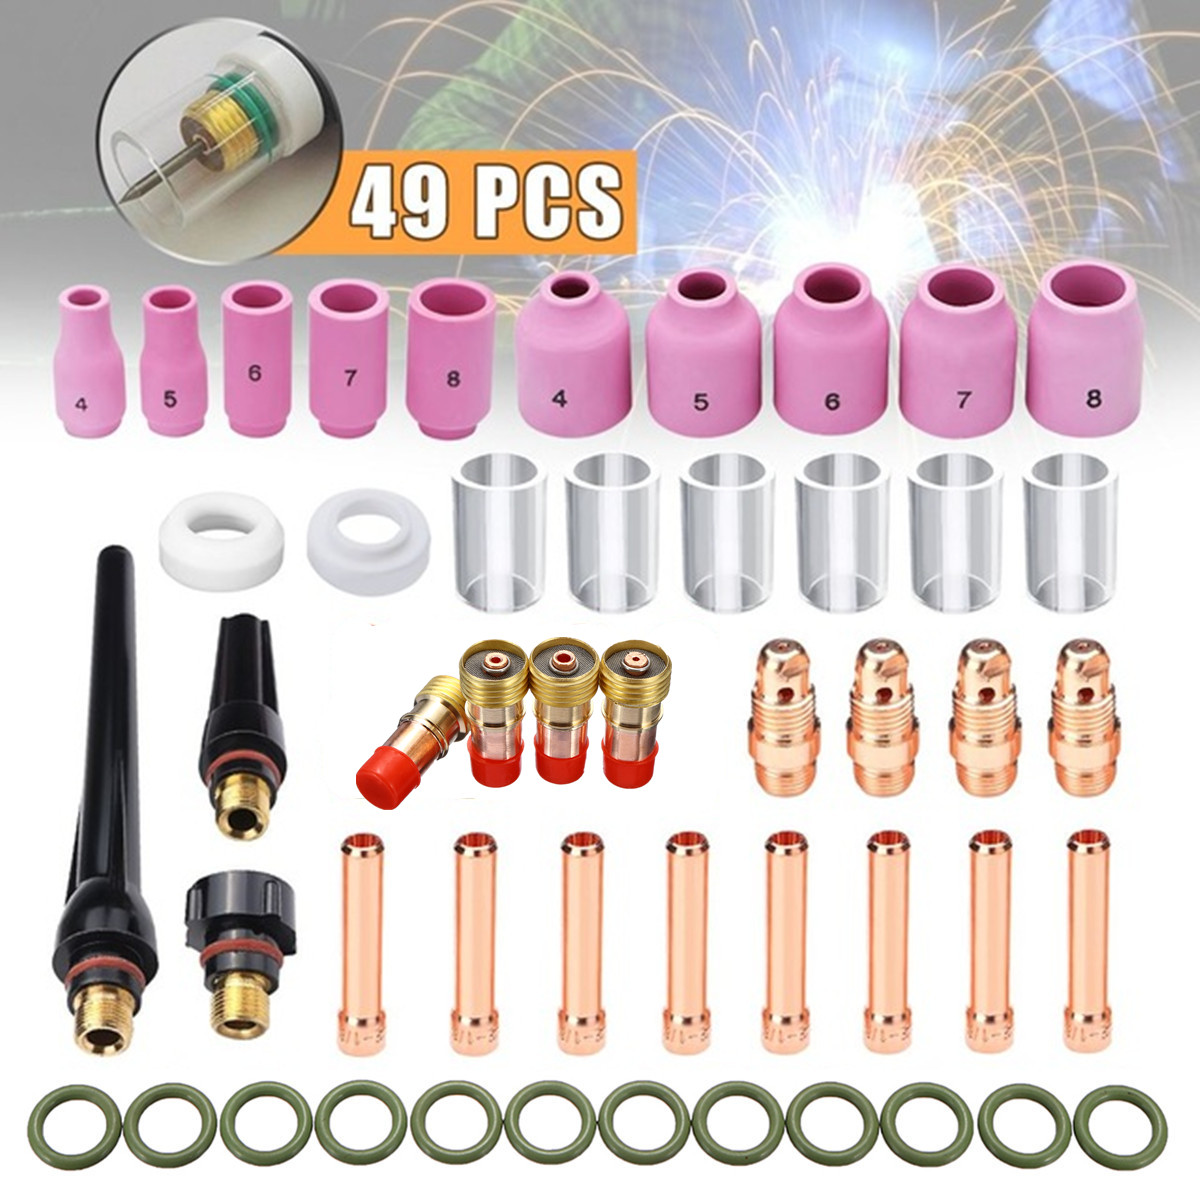 49Pcs-TIG-Welding-Torch-Stubby-Gas-Lens-10-Pyrex-Glass-Cup-Kit-for-WP-171826-1374568-1